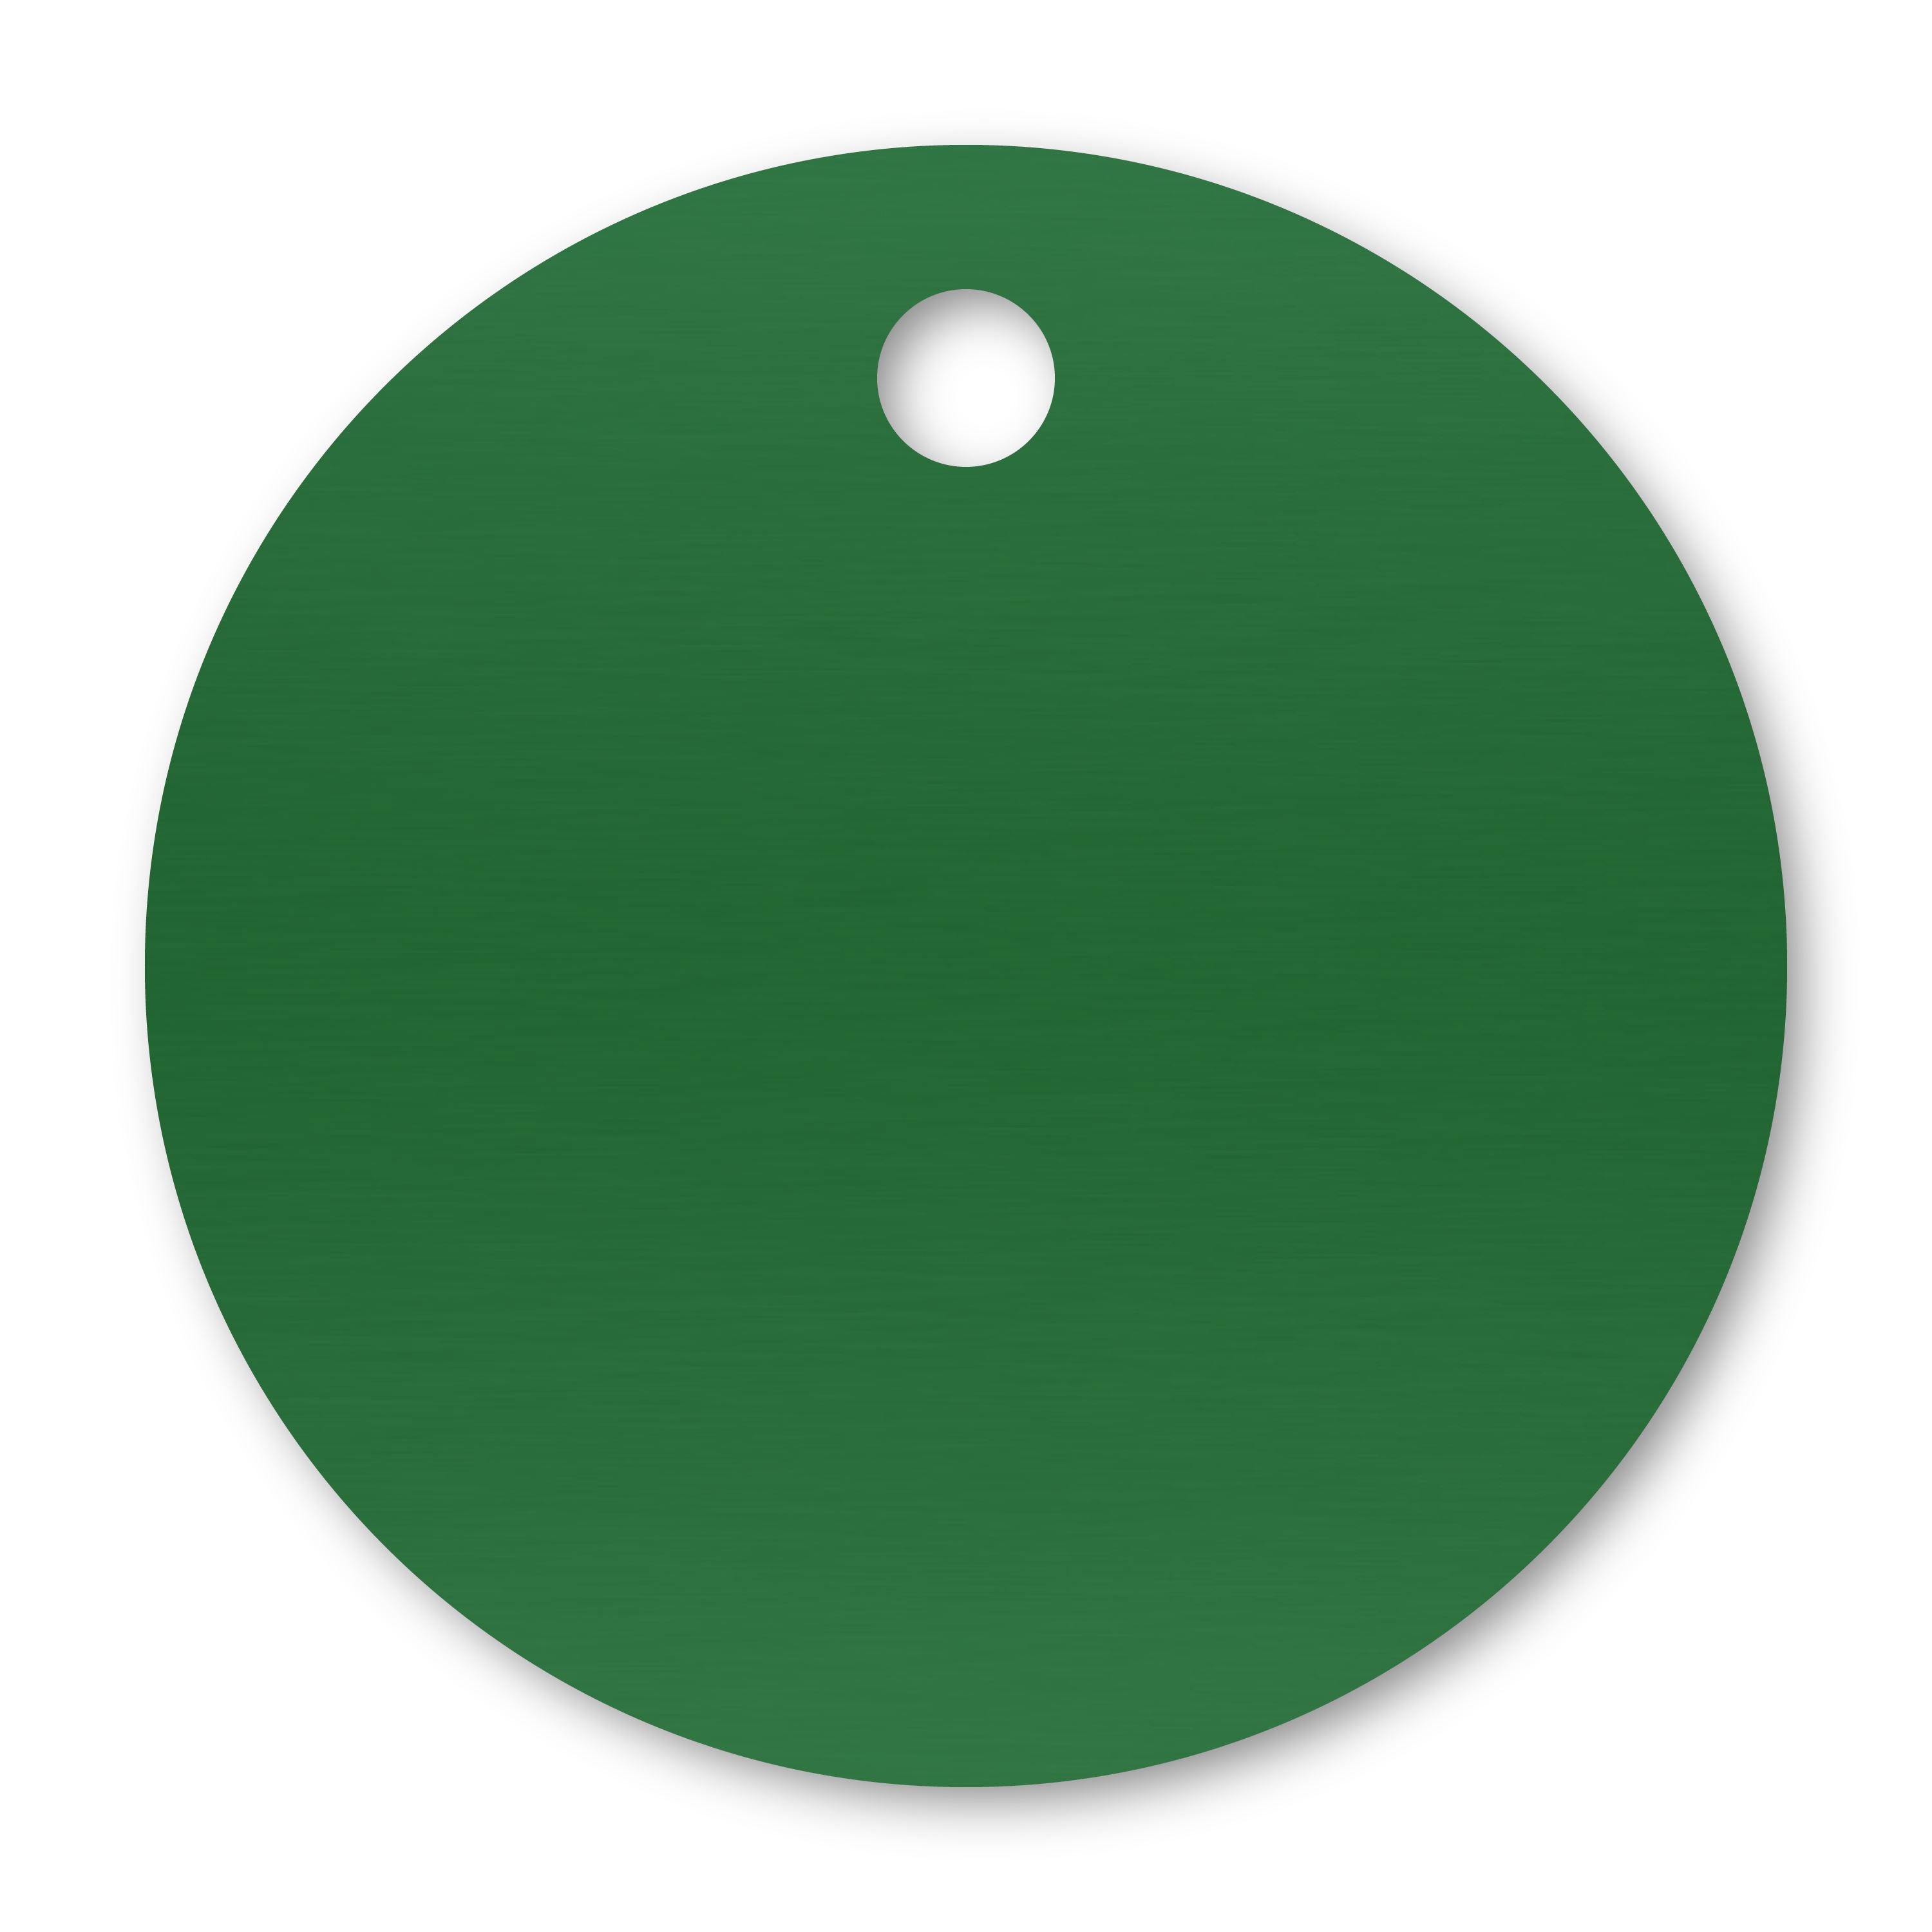 Anodized Aluminum Round Tags, 1-1/4" with 1/8" Hole, Laser Engraved Metal Tags Craftworks NW Green 